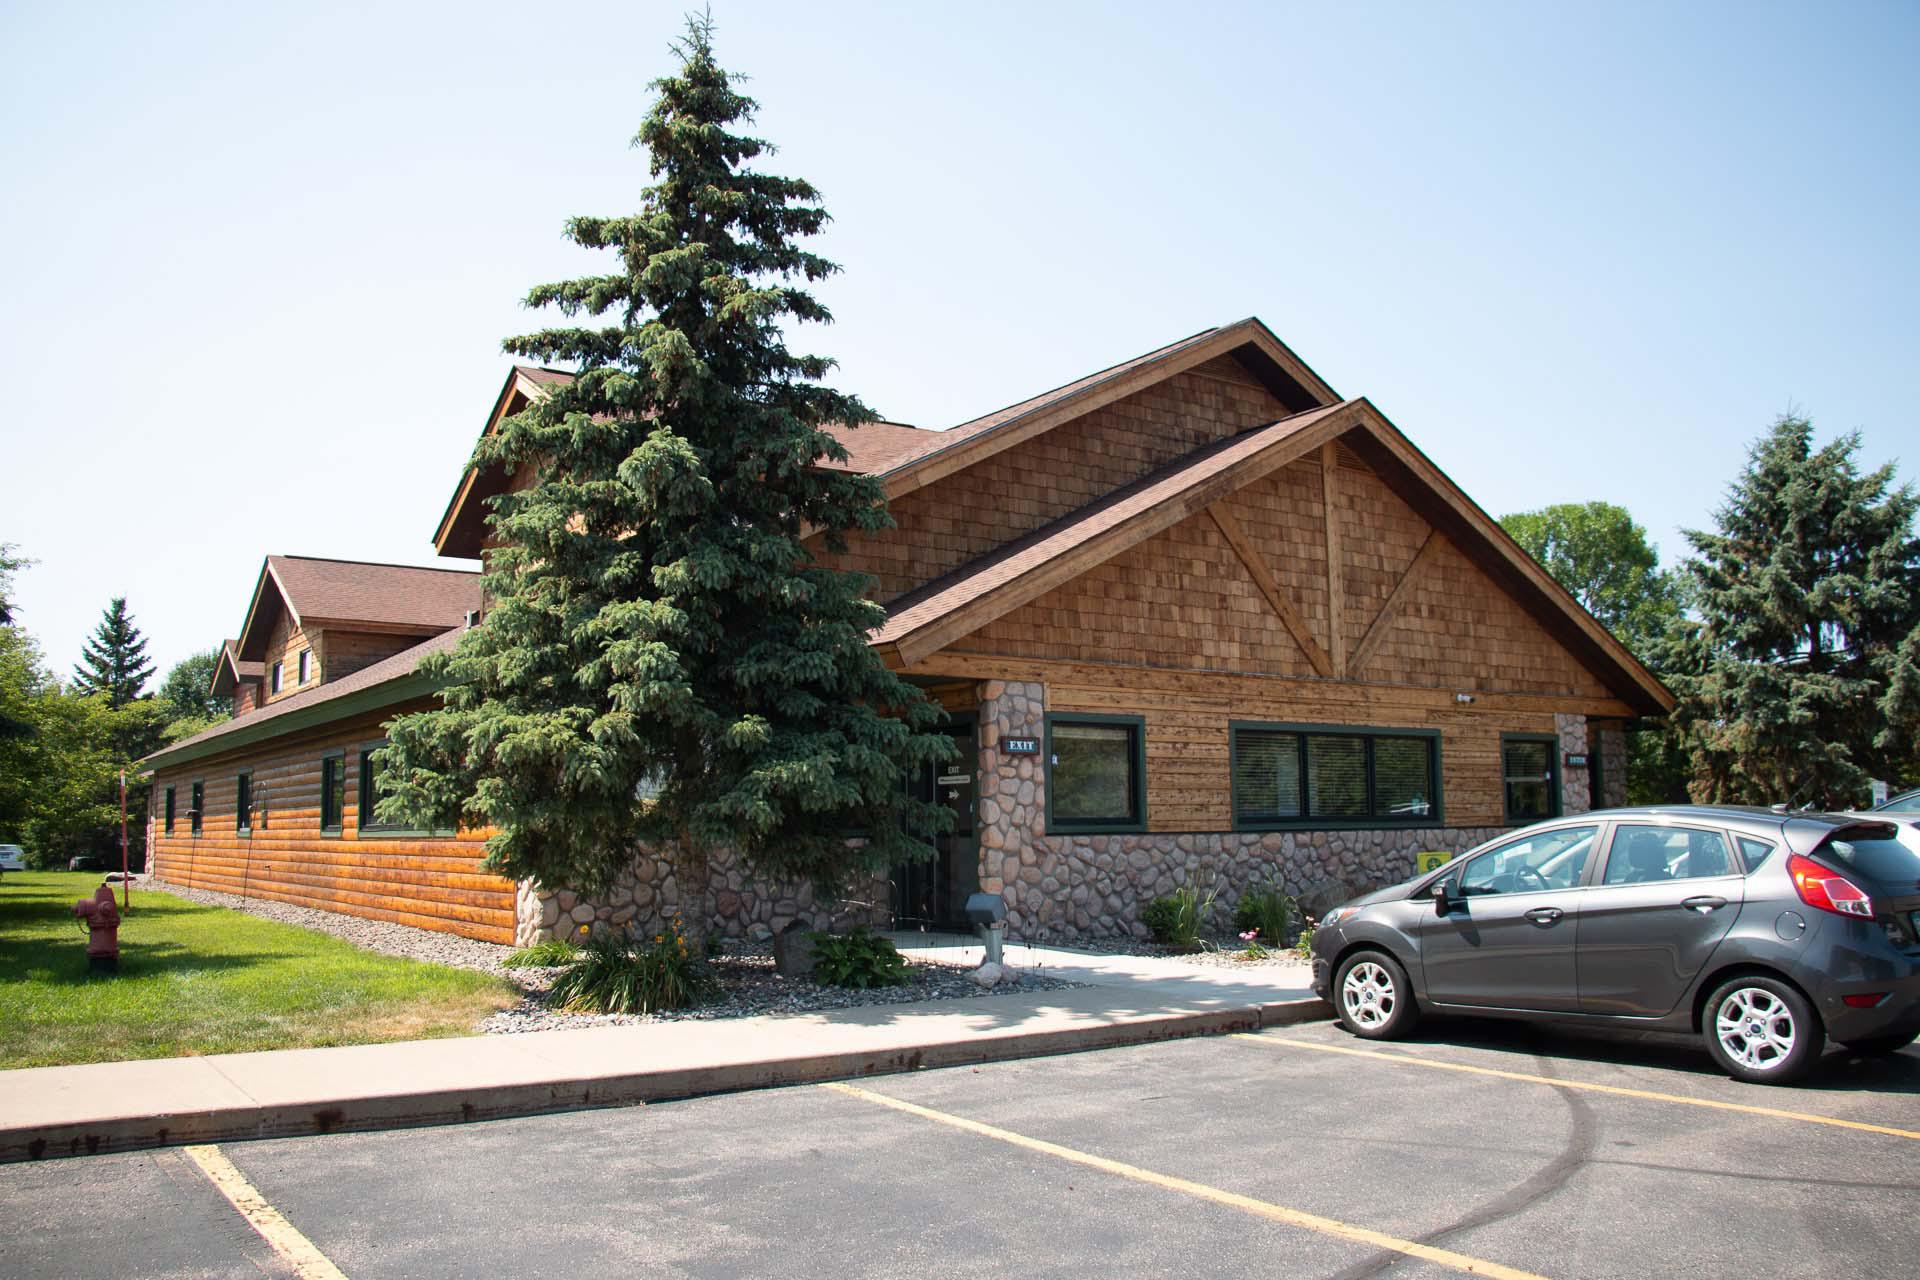 Lakeland Veterinary Hospital has been serving the Brainerd Lakes Region for more than 40 years. Our current veterinary medical facility has been our home-base since the year 2000, when it was built by local architects for the specific purpose of being a functional and modern veterinary practice.